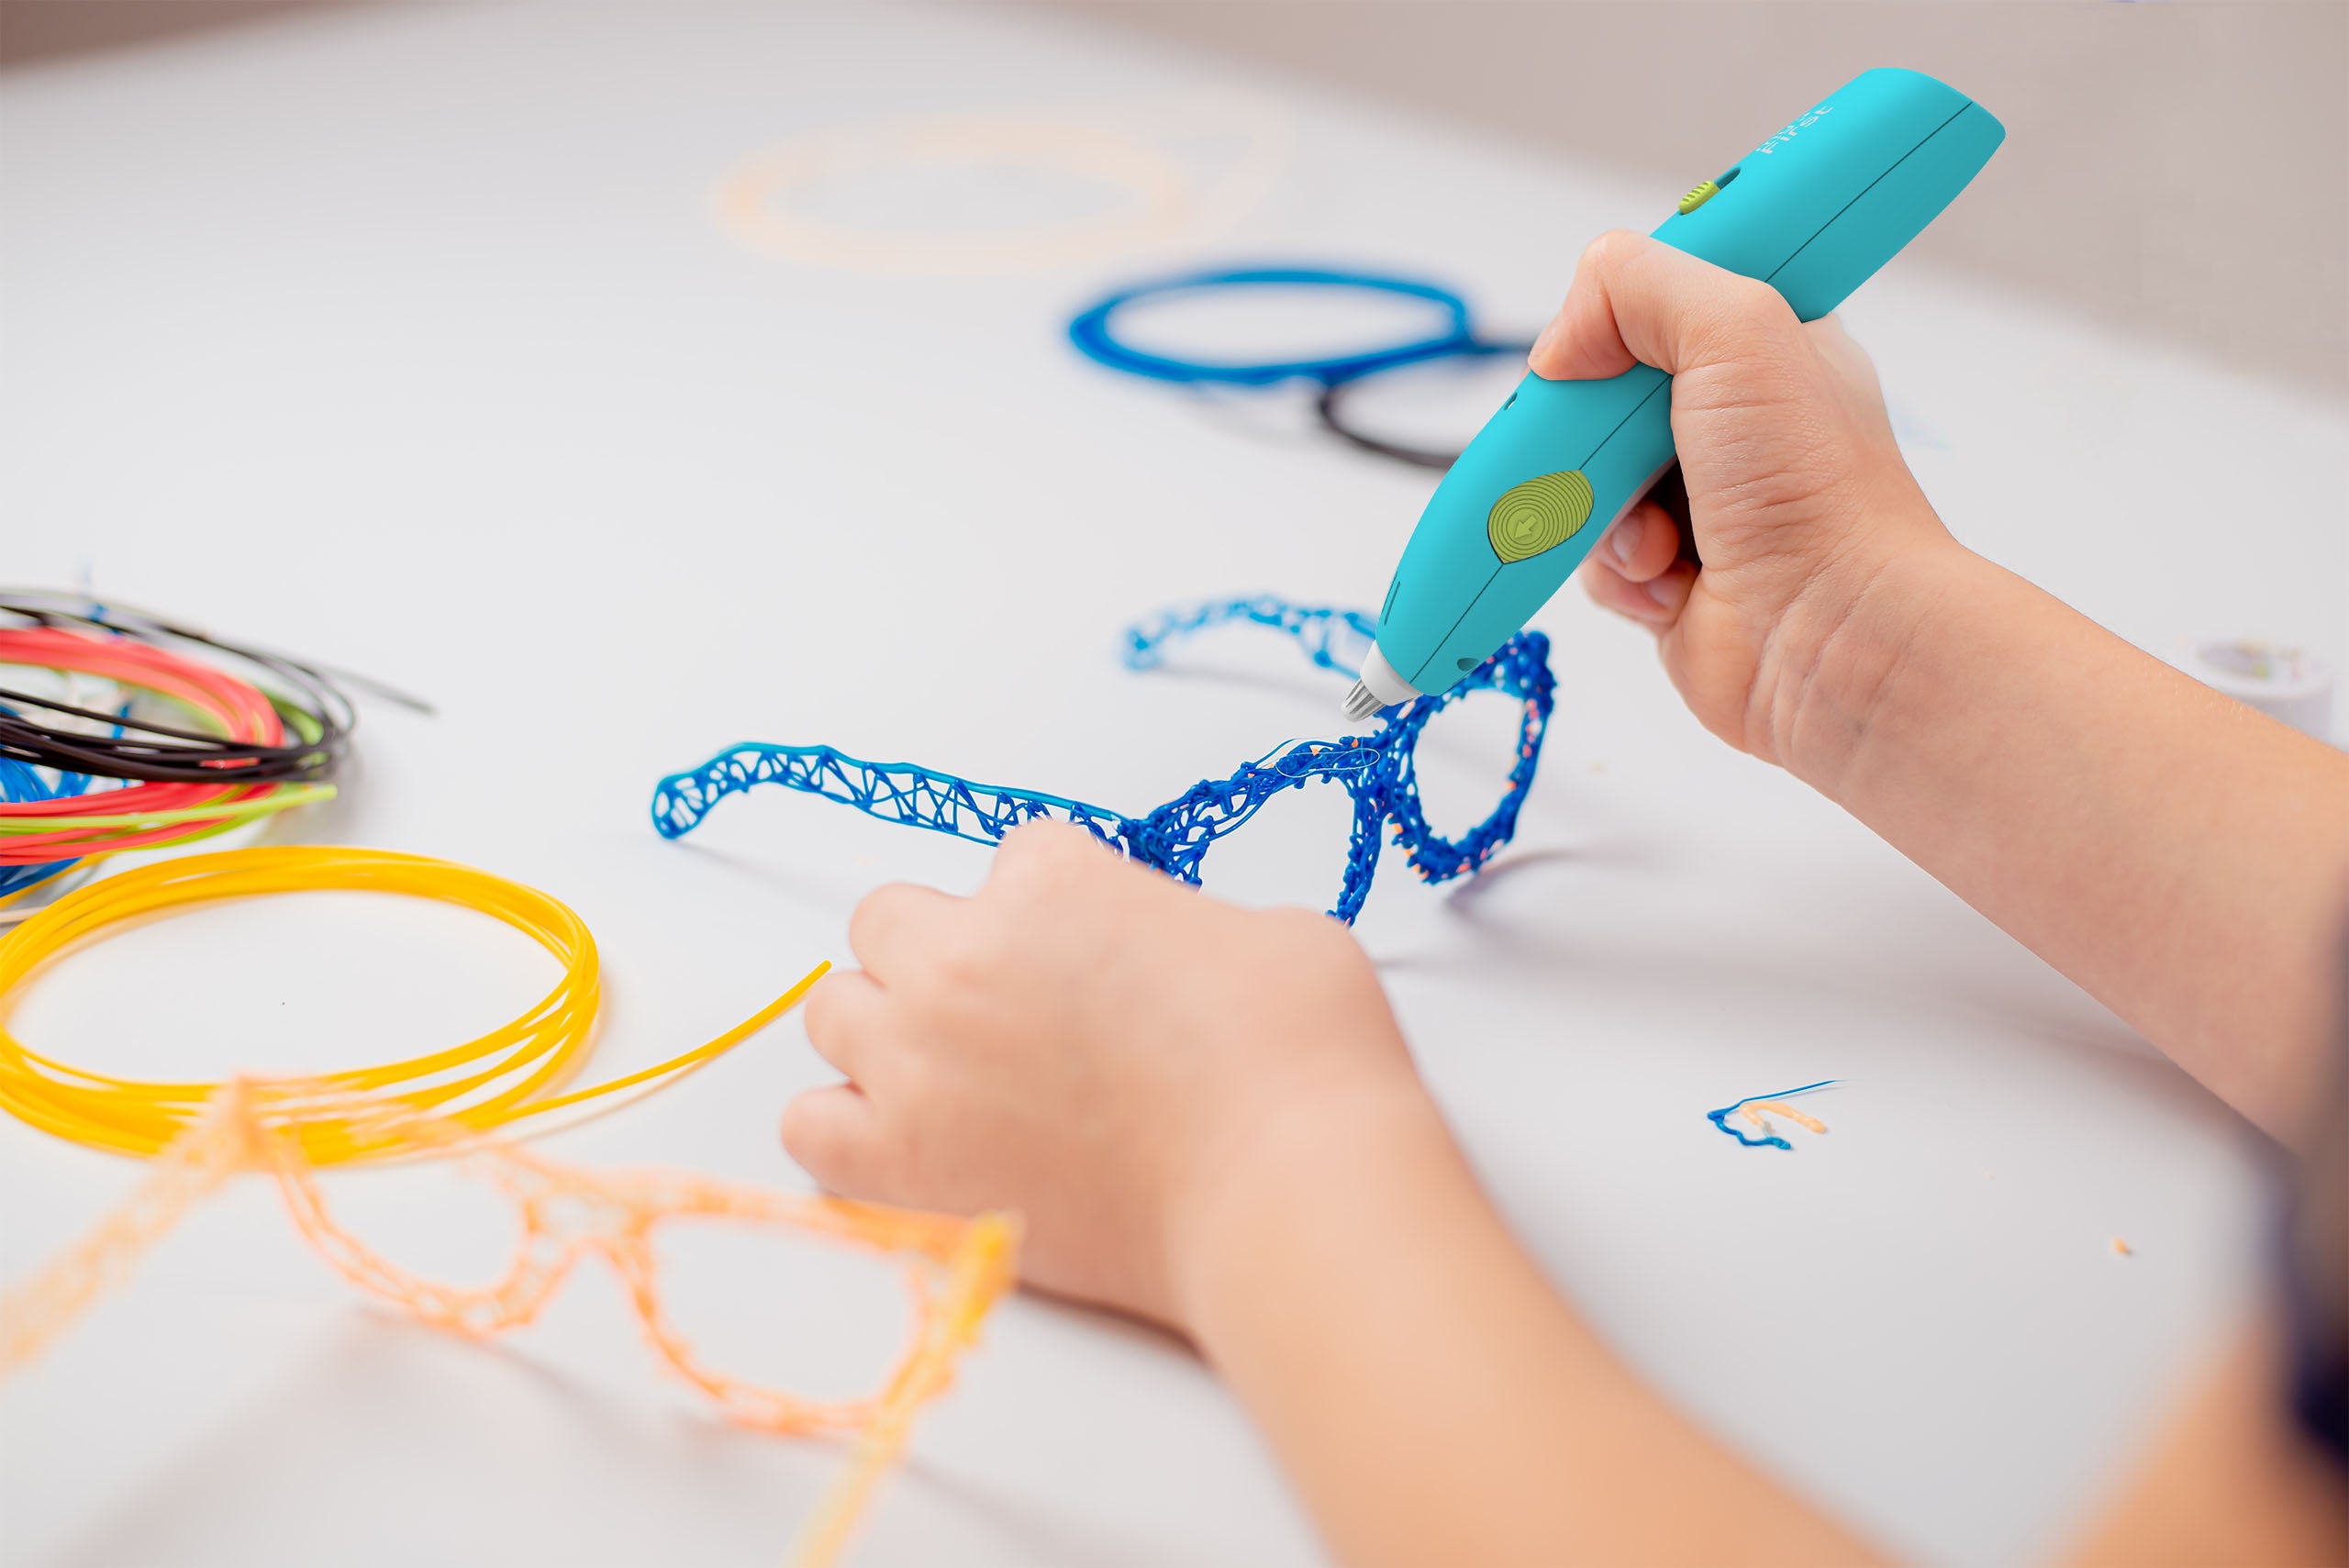 3d Pens for Kids With Wireless & Rechargeable Battery - myFirst 3dPen Make